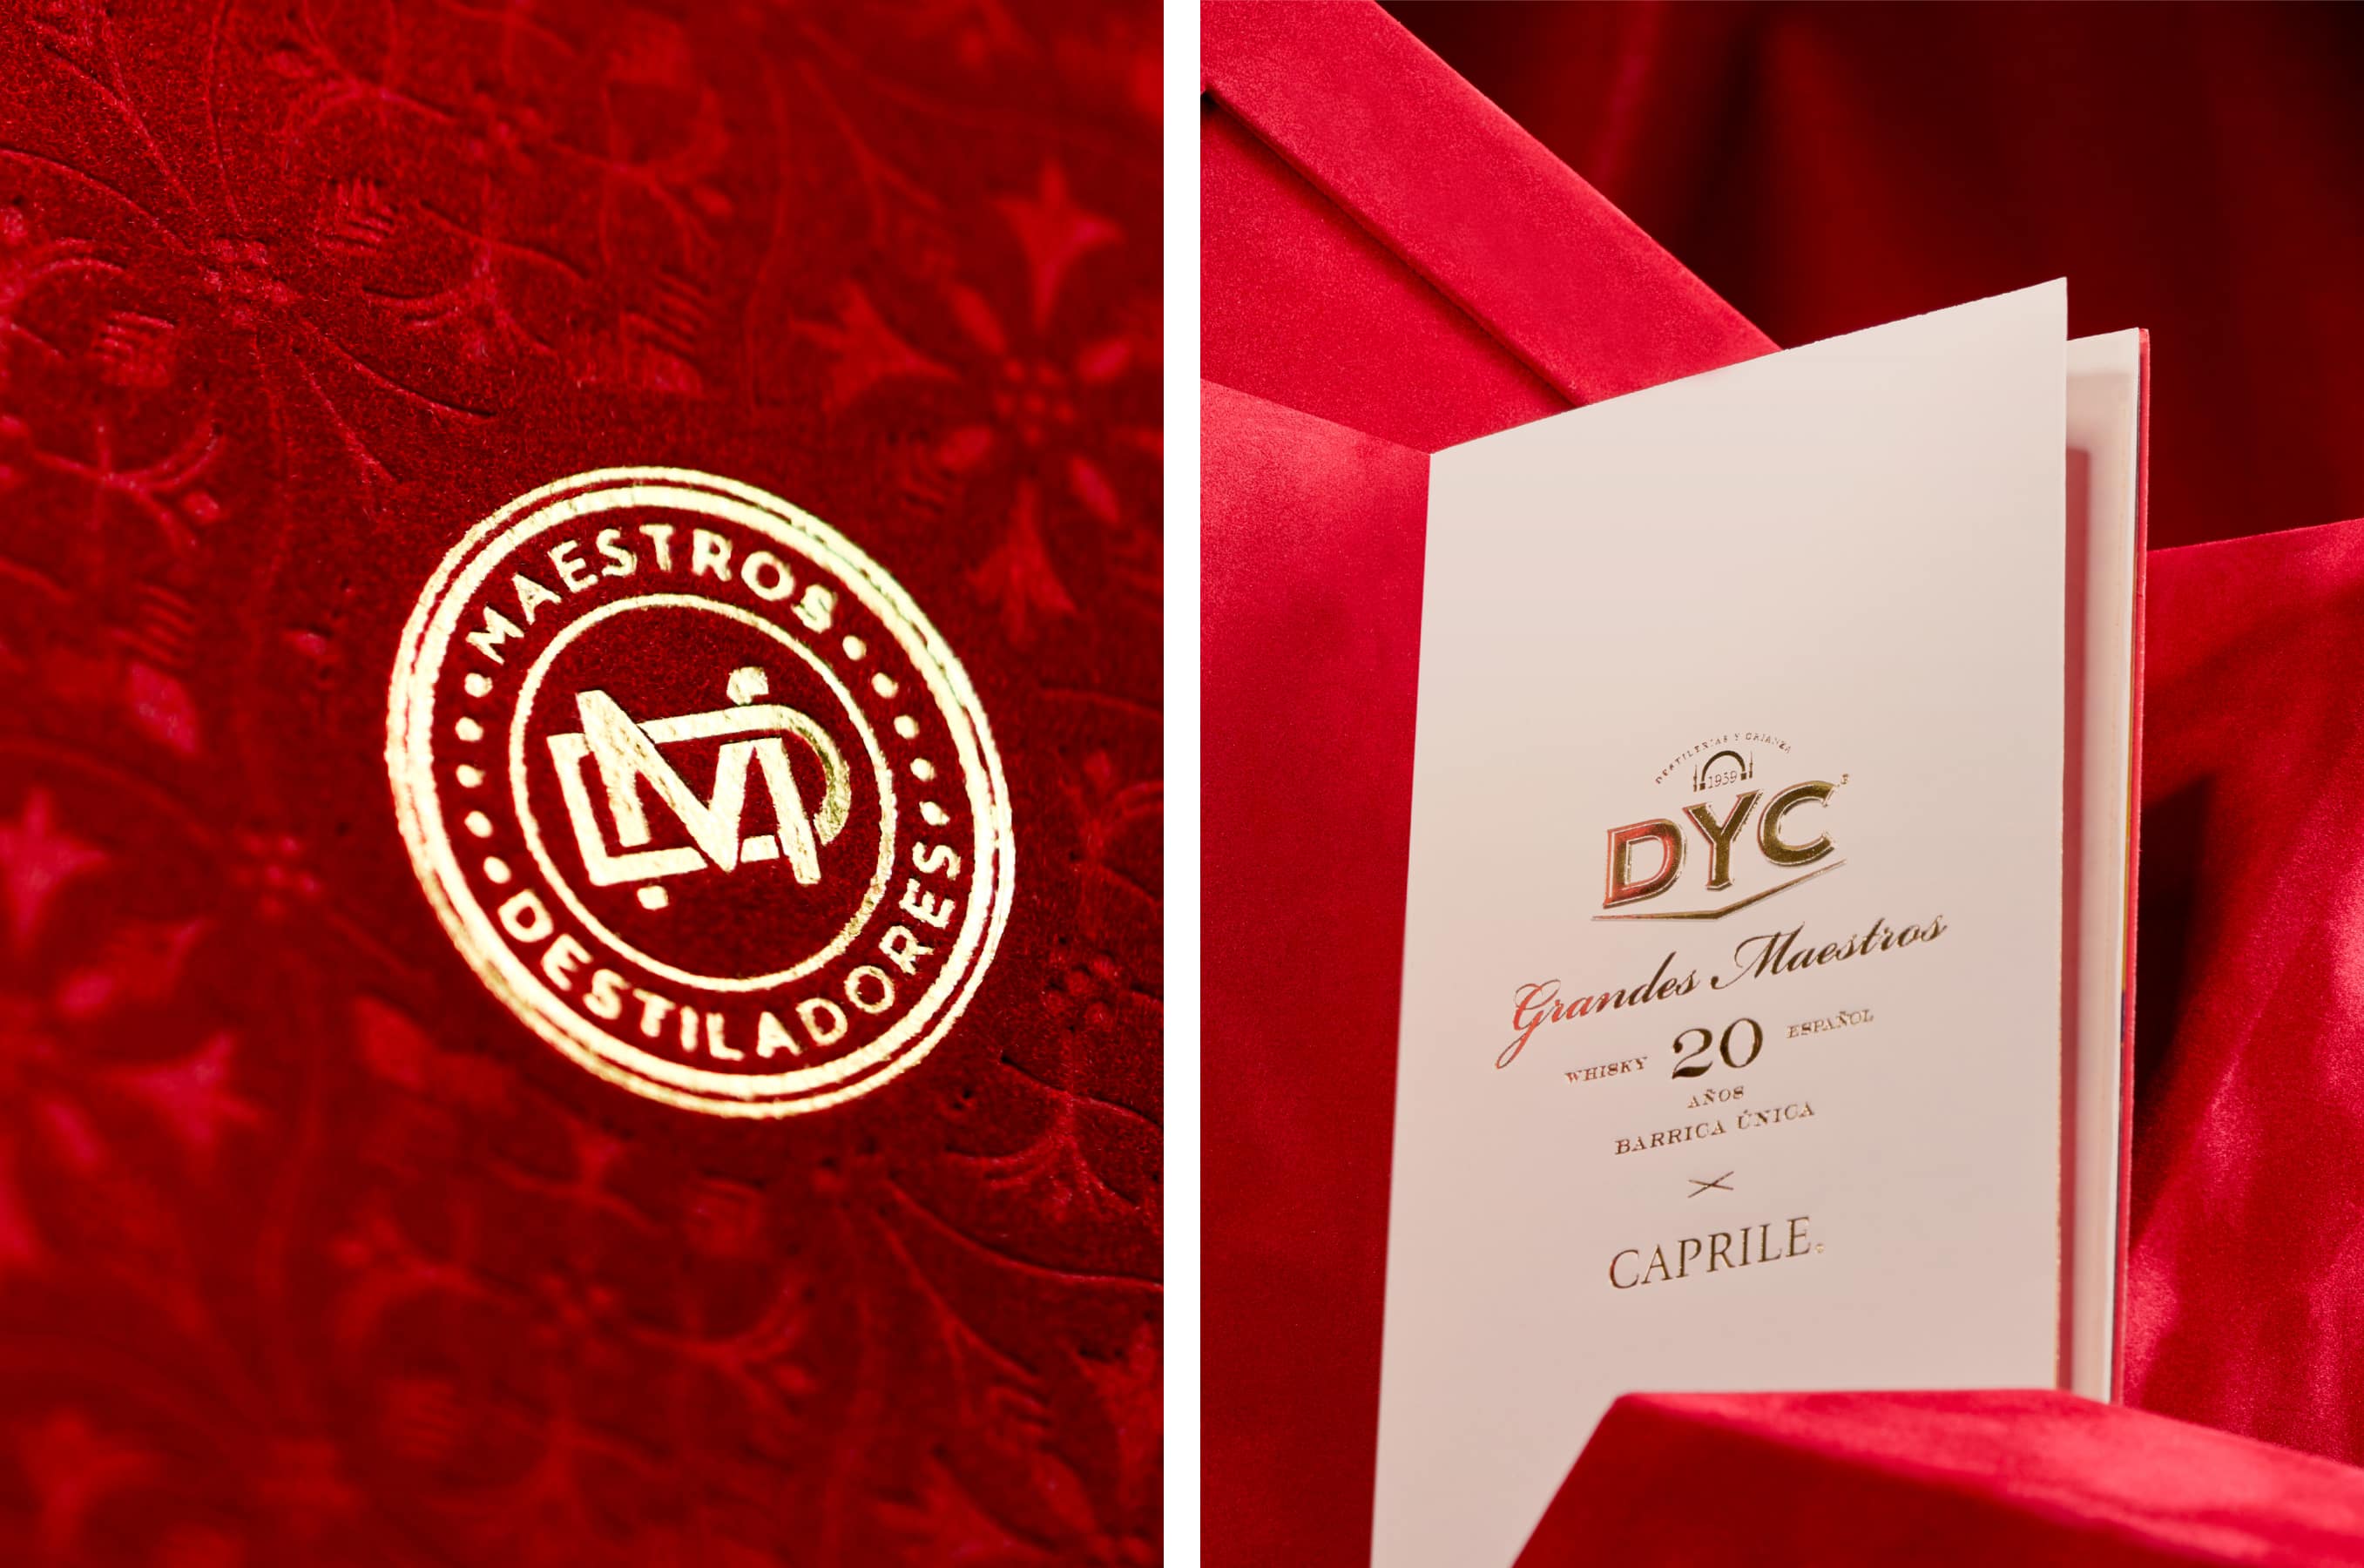 Following 20 years of patient maturation in a single American oak barrel, DYC 20 represents the brand's most premium edition, born to pay tribute to the excellent quality and exquisite know-how of our country.
